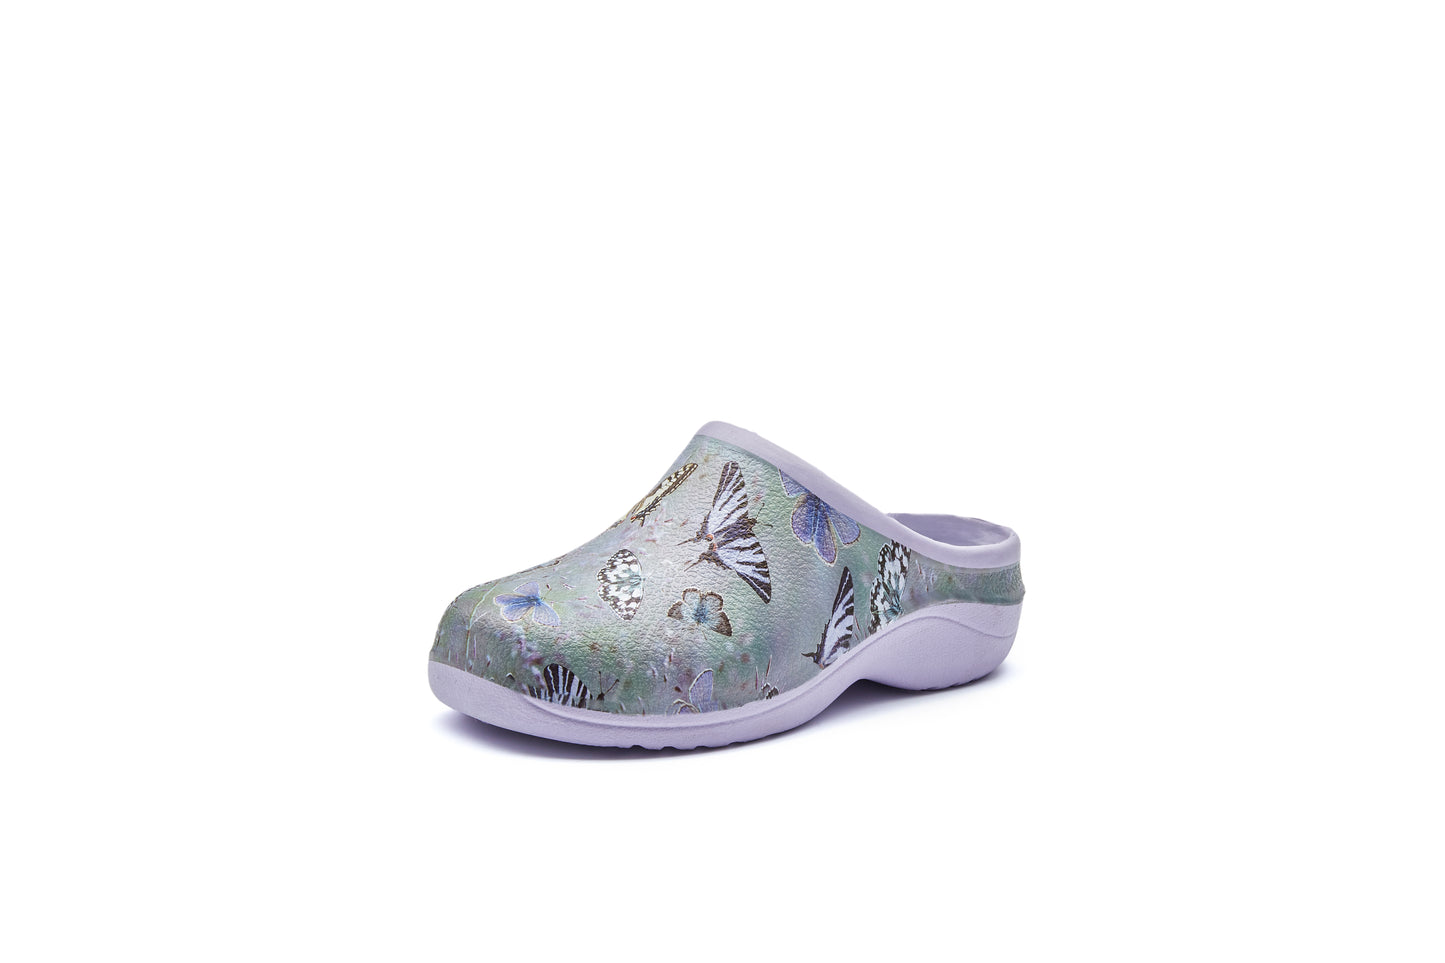 Butterfly Garden Clogs Backdoorshoes®